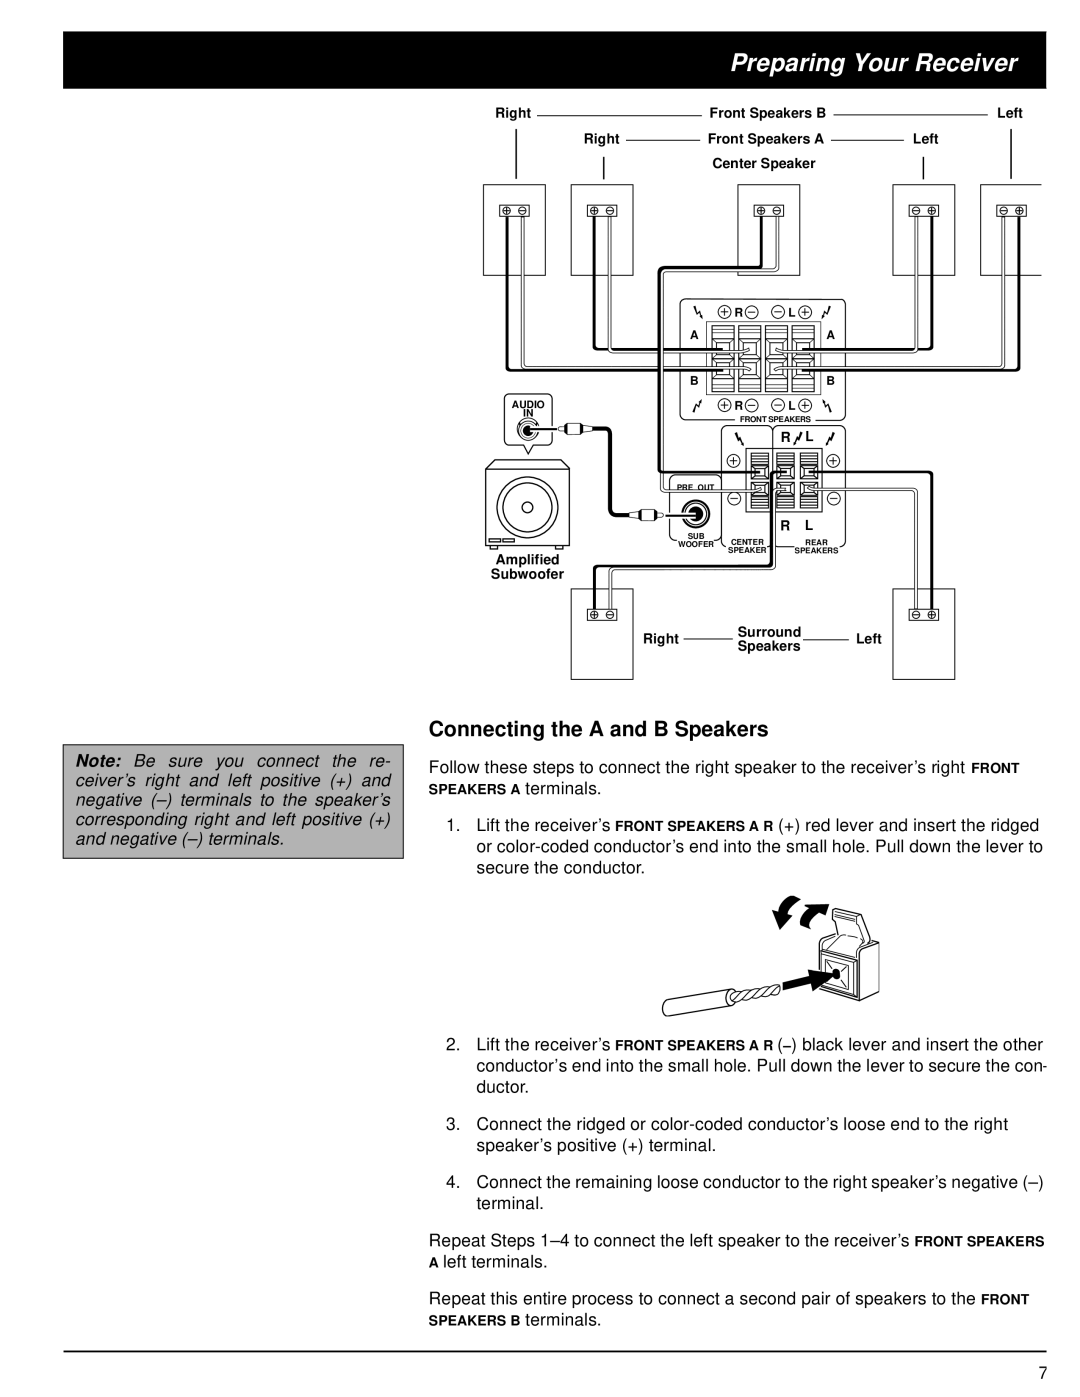 Optimus STAV-3670 owner manual Connecting the A and B Speakers, Preparing Your Receiver 